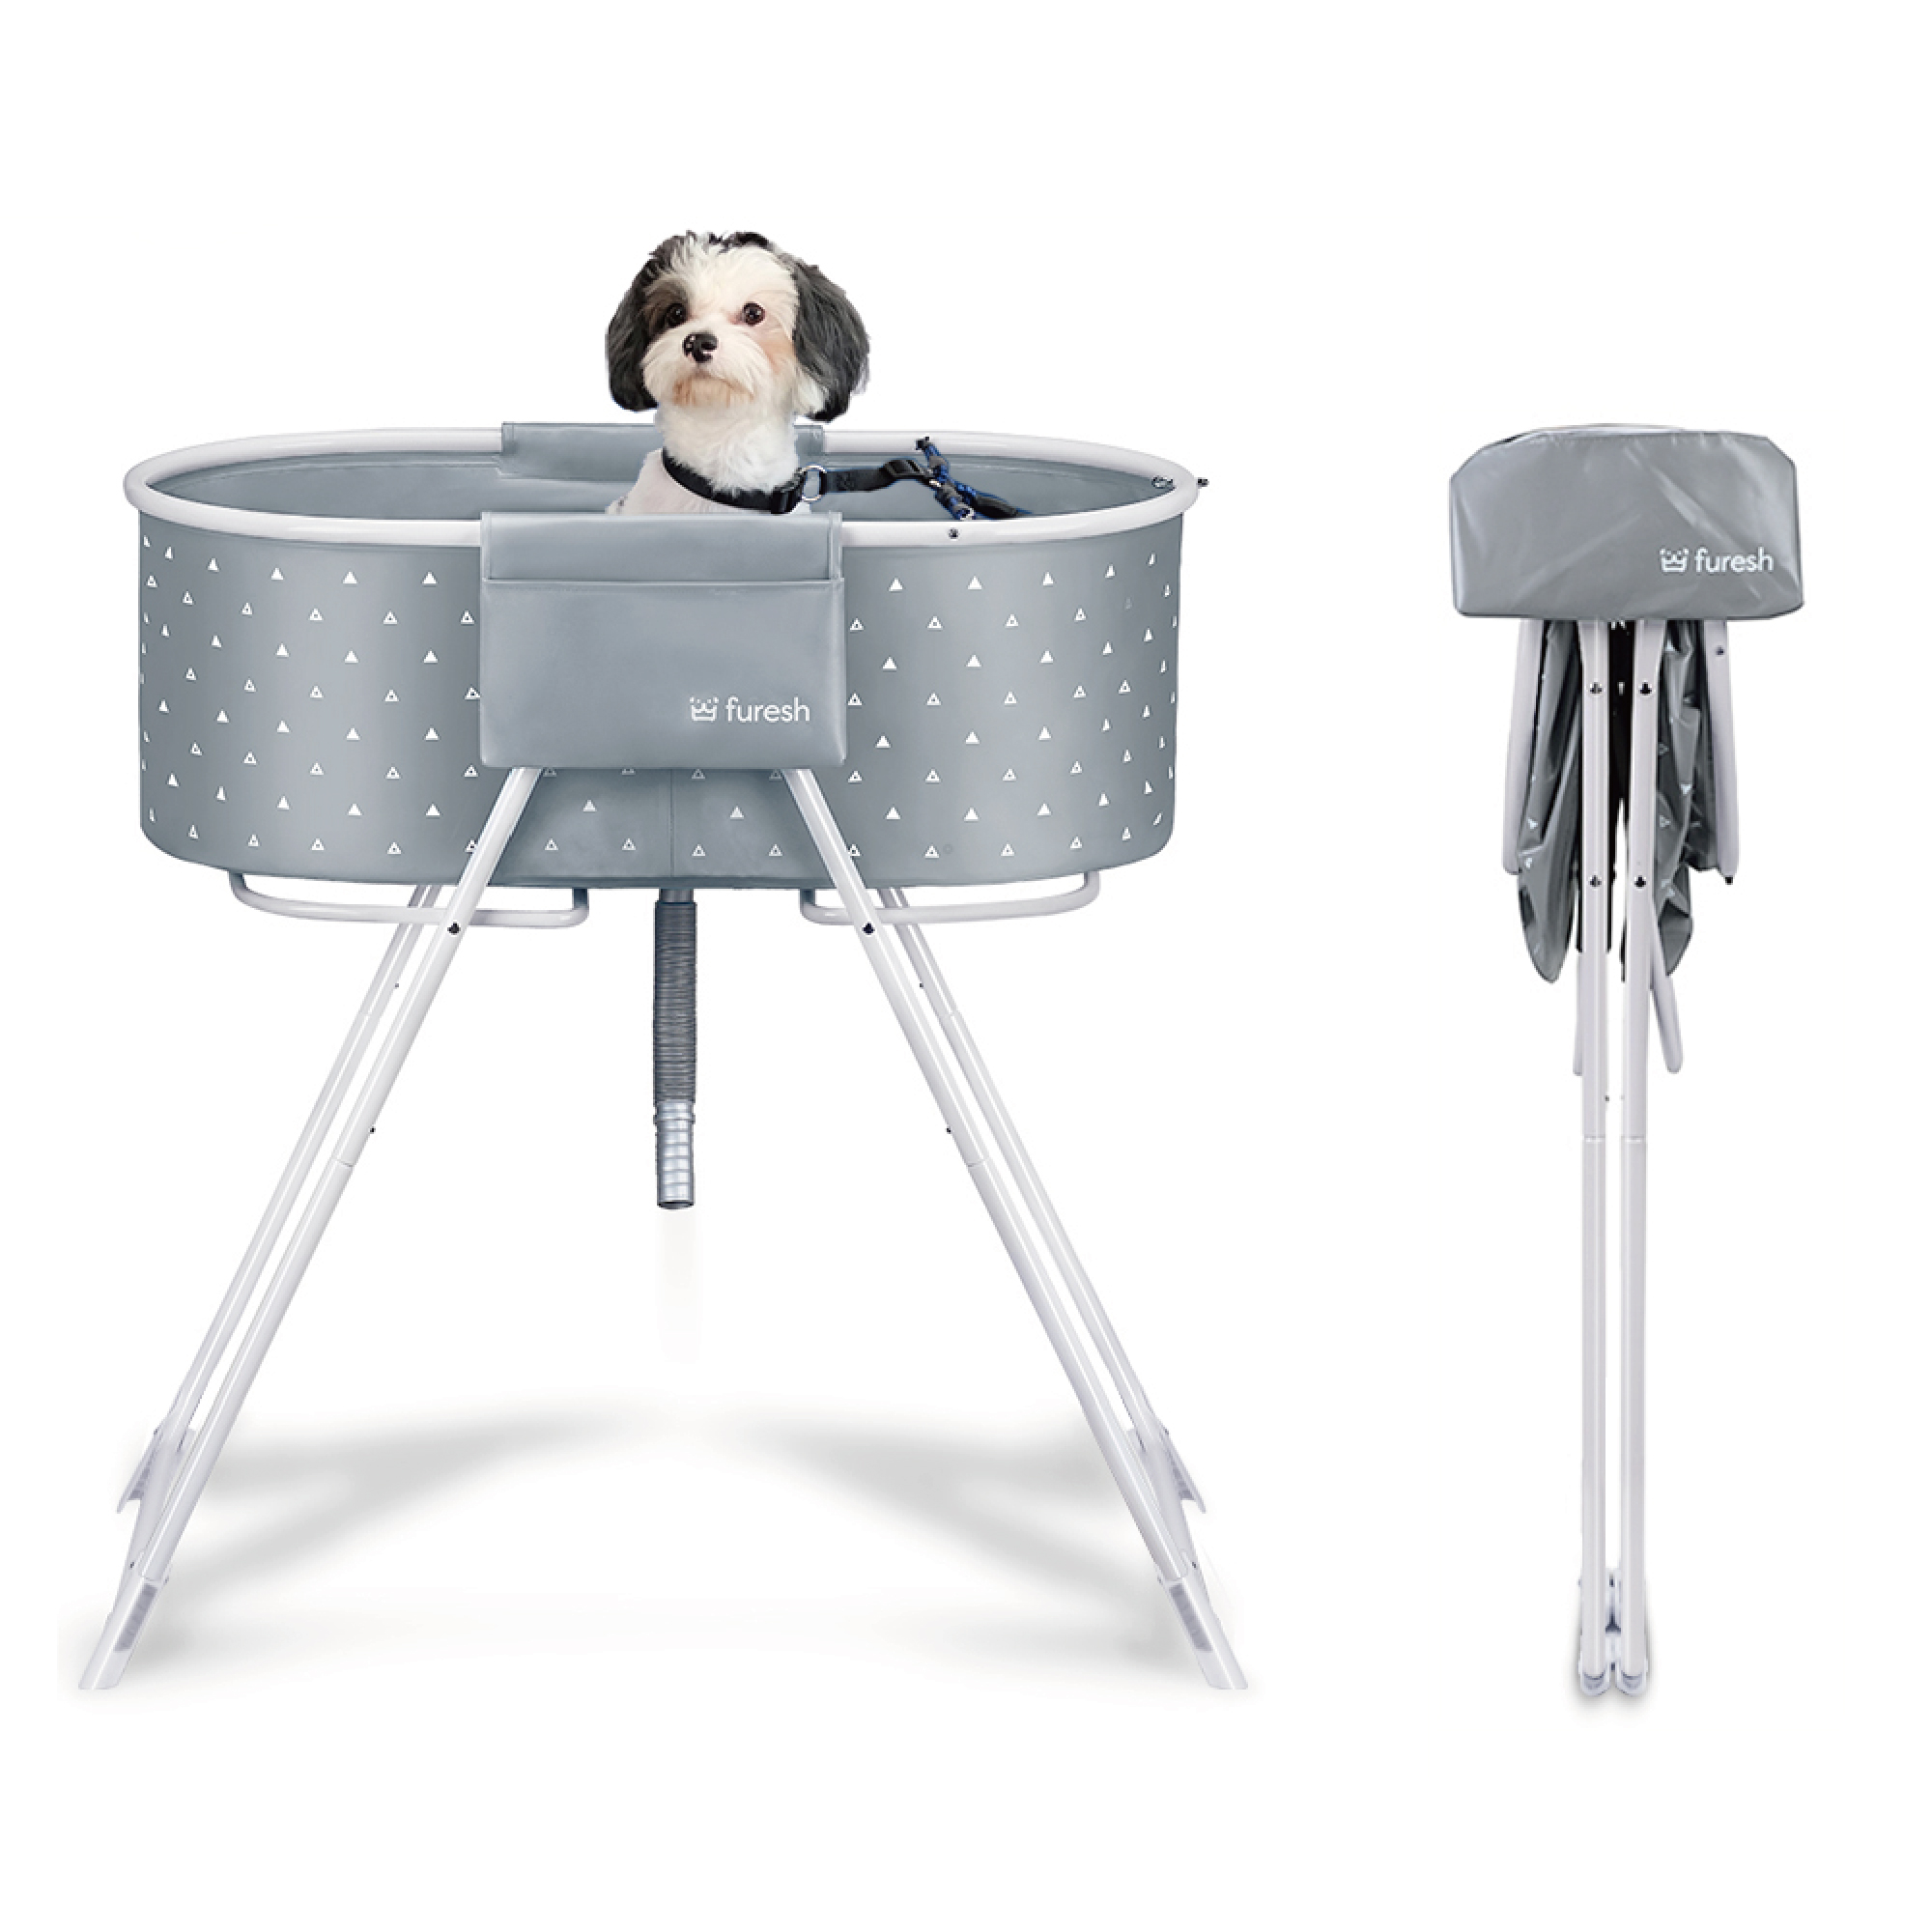 Furesh Elevated Folding Pet Bath Tub and Wash Station for Bathing, Shower and Grooming, Gray - image 1 of 6